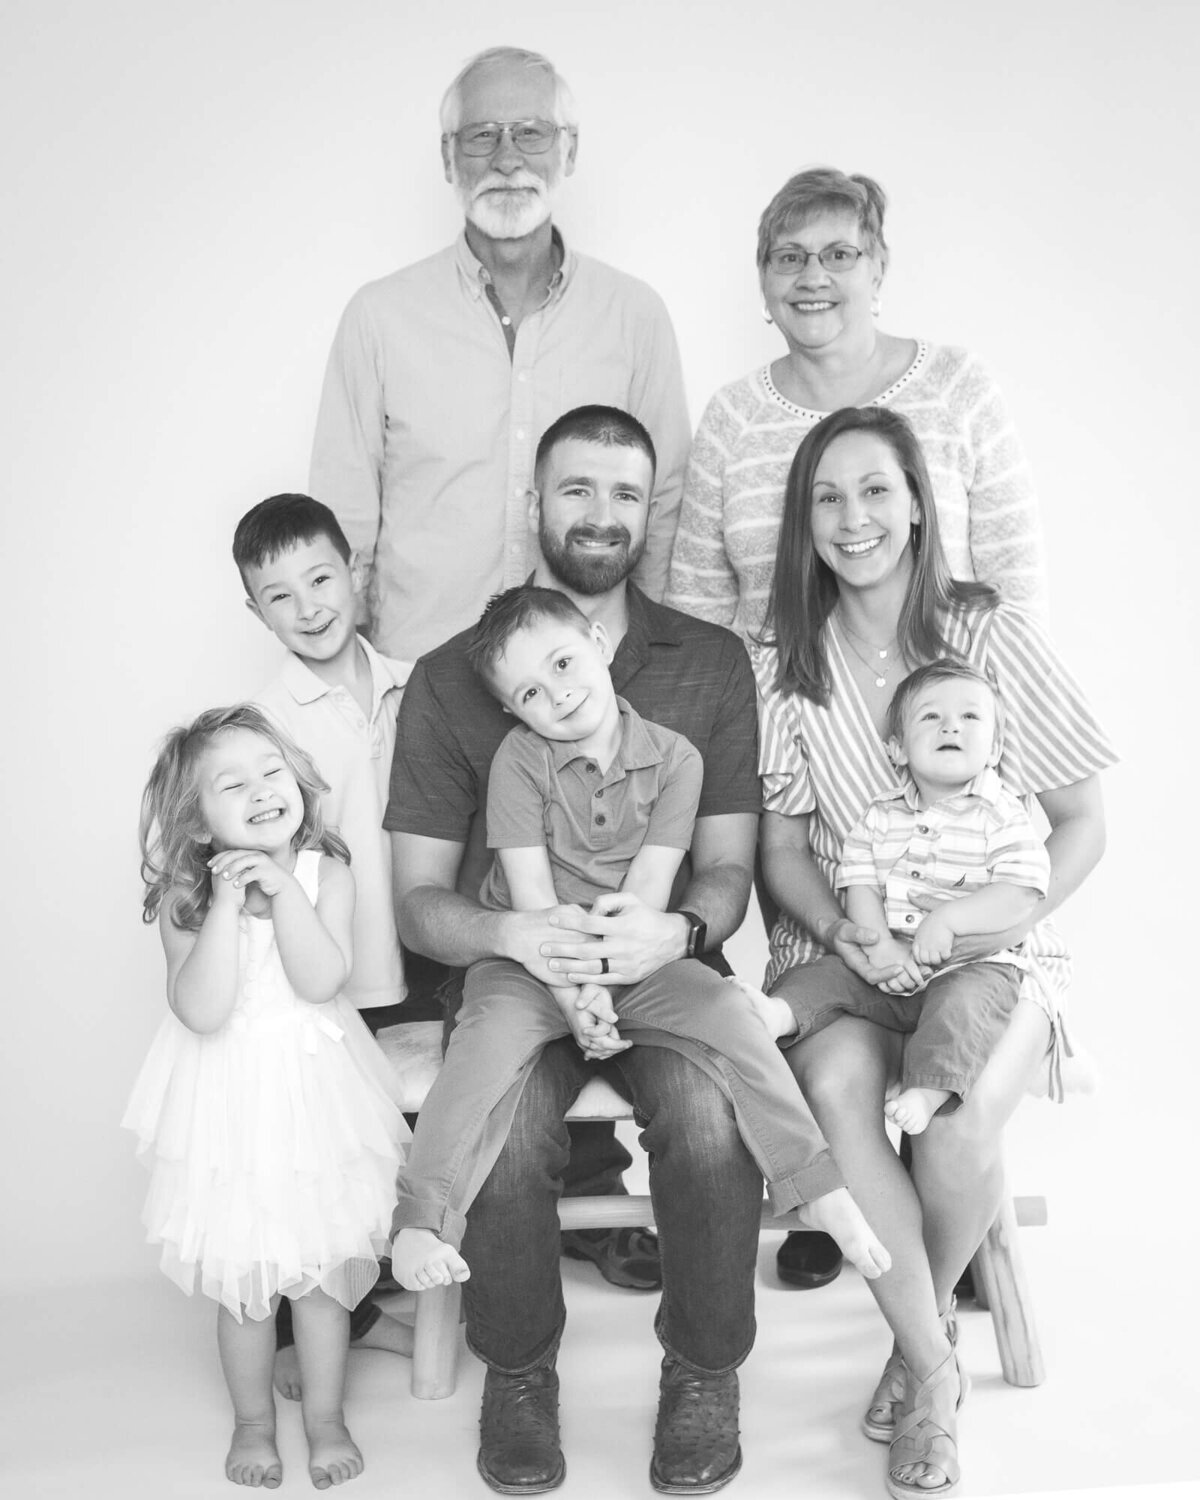 family of 5 and grandparents in studio for a family portrait.  Kids looking so adorable, edited in light and airy black and white